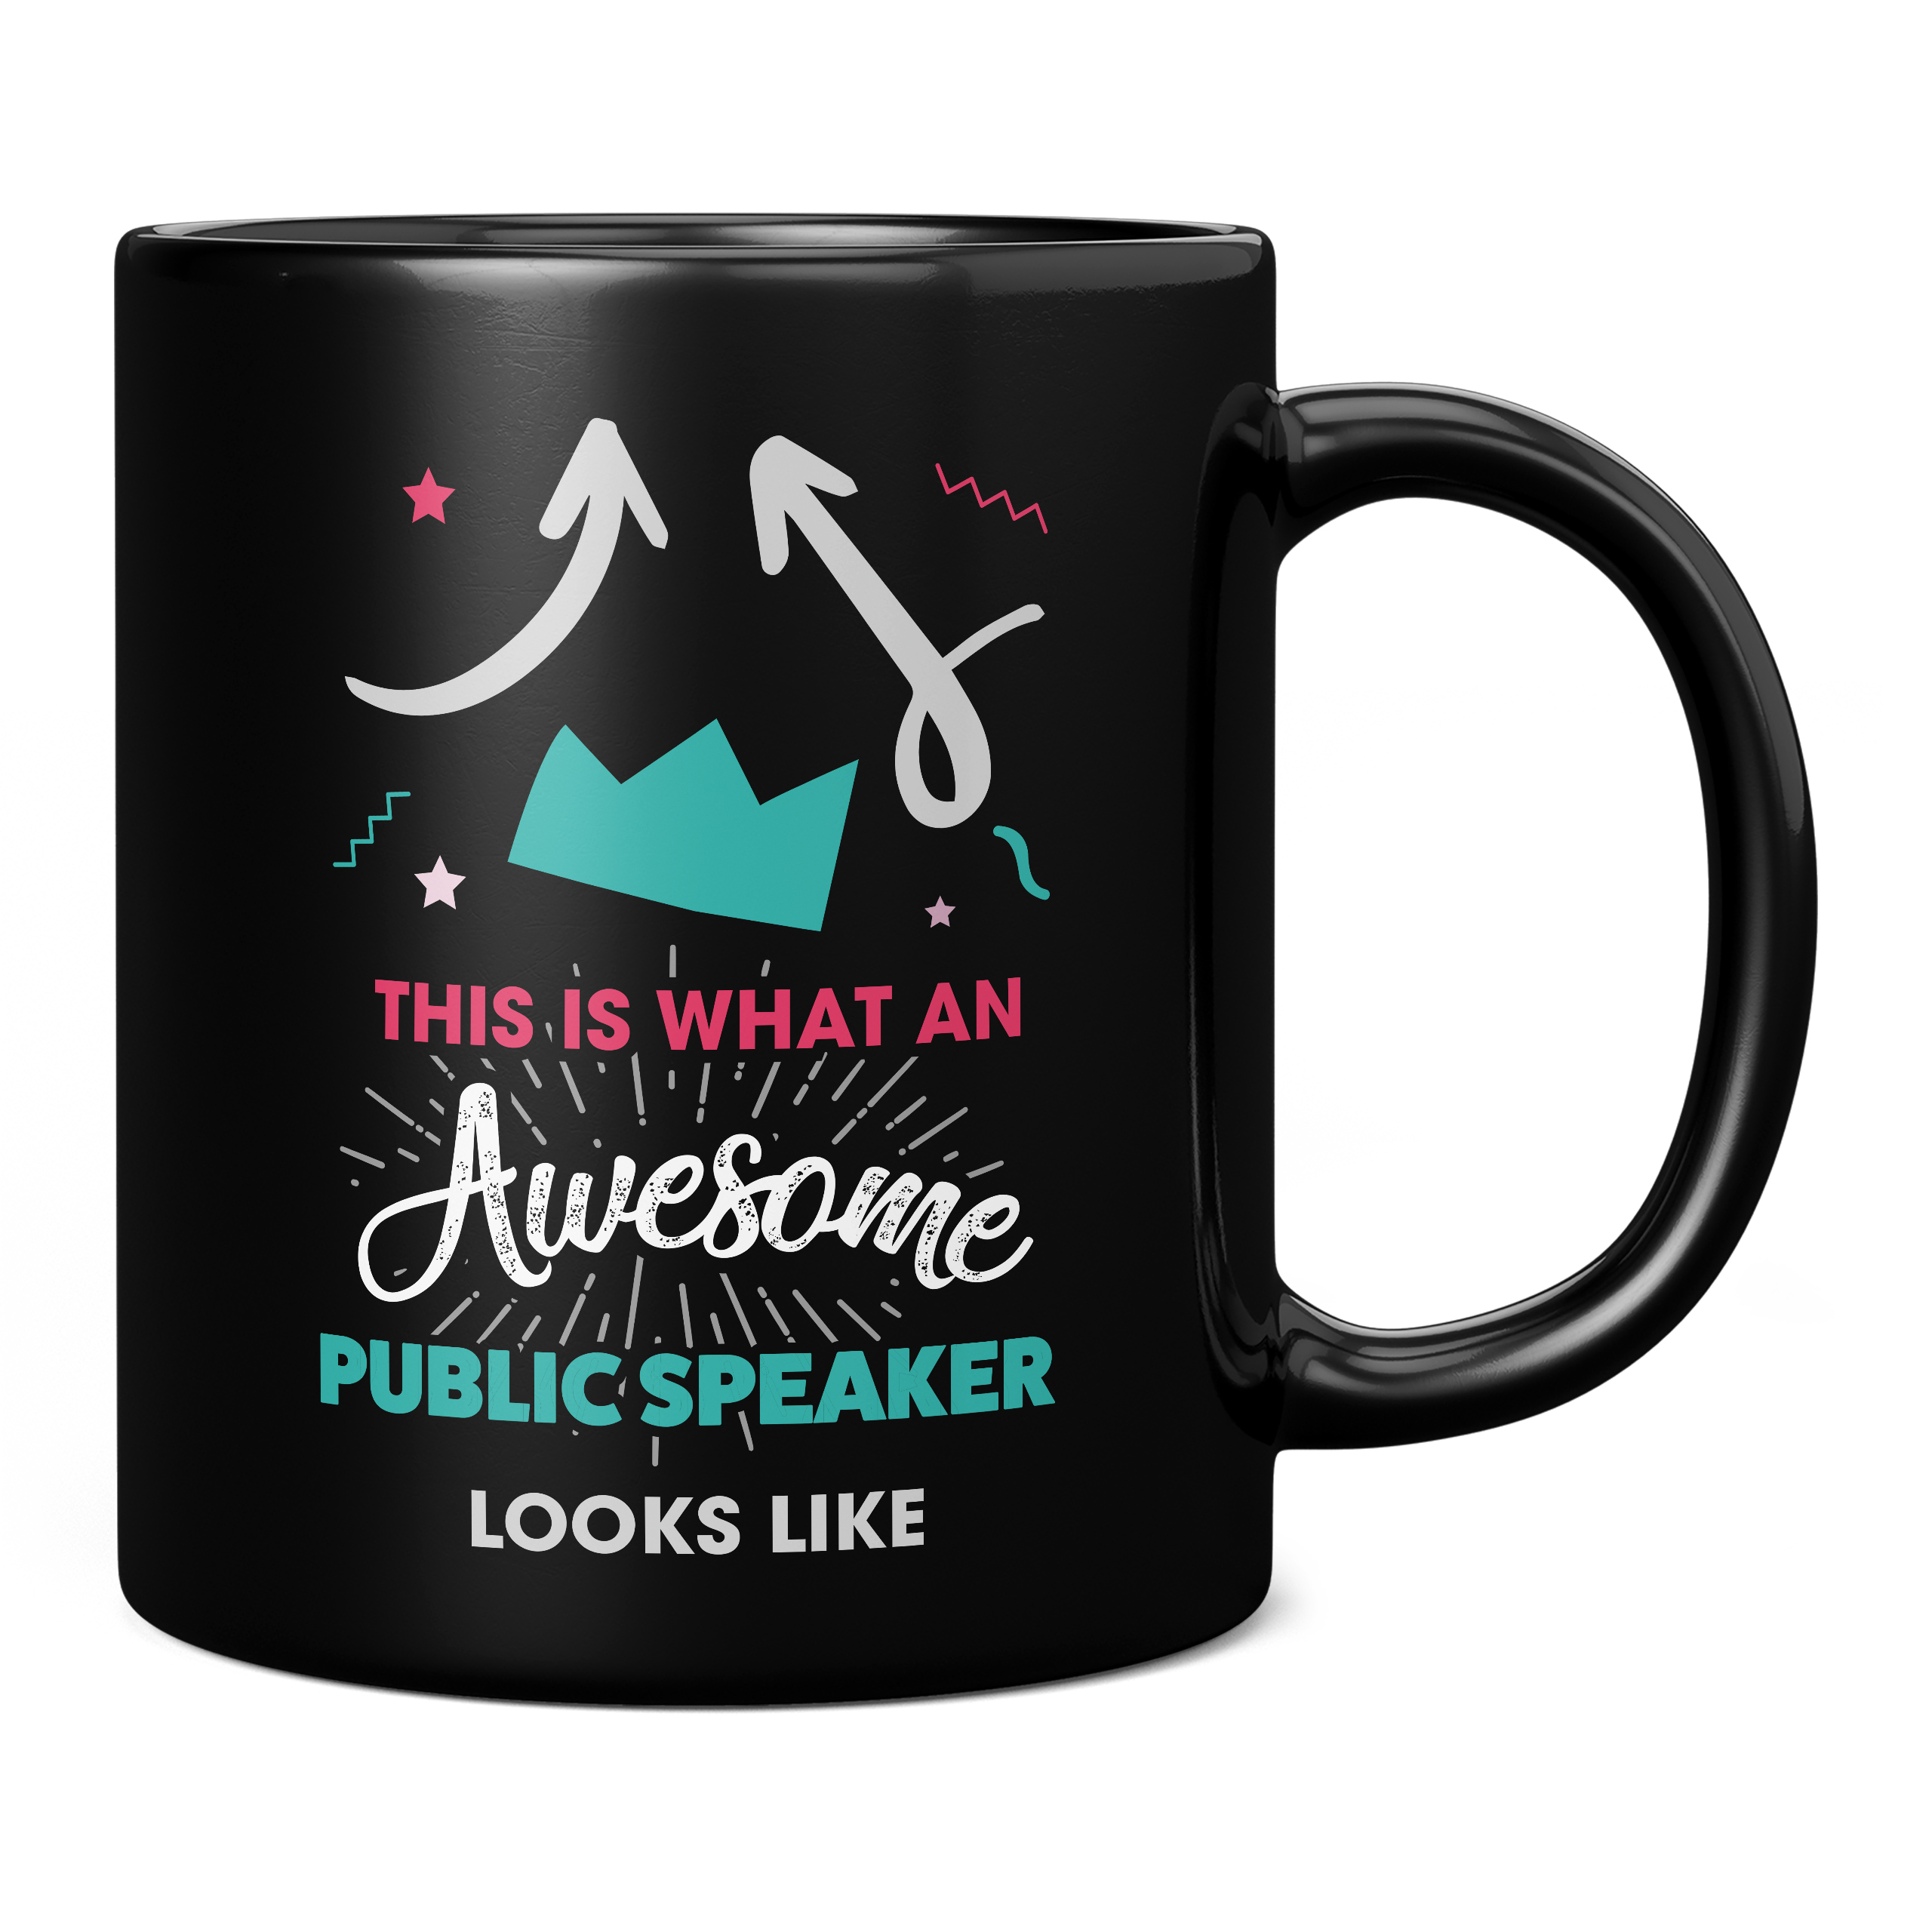 THIS IS WHAT AN AWESOME PUBLIC SPEAKER LOOKS LIKE 11OZ NOVELTY MUG